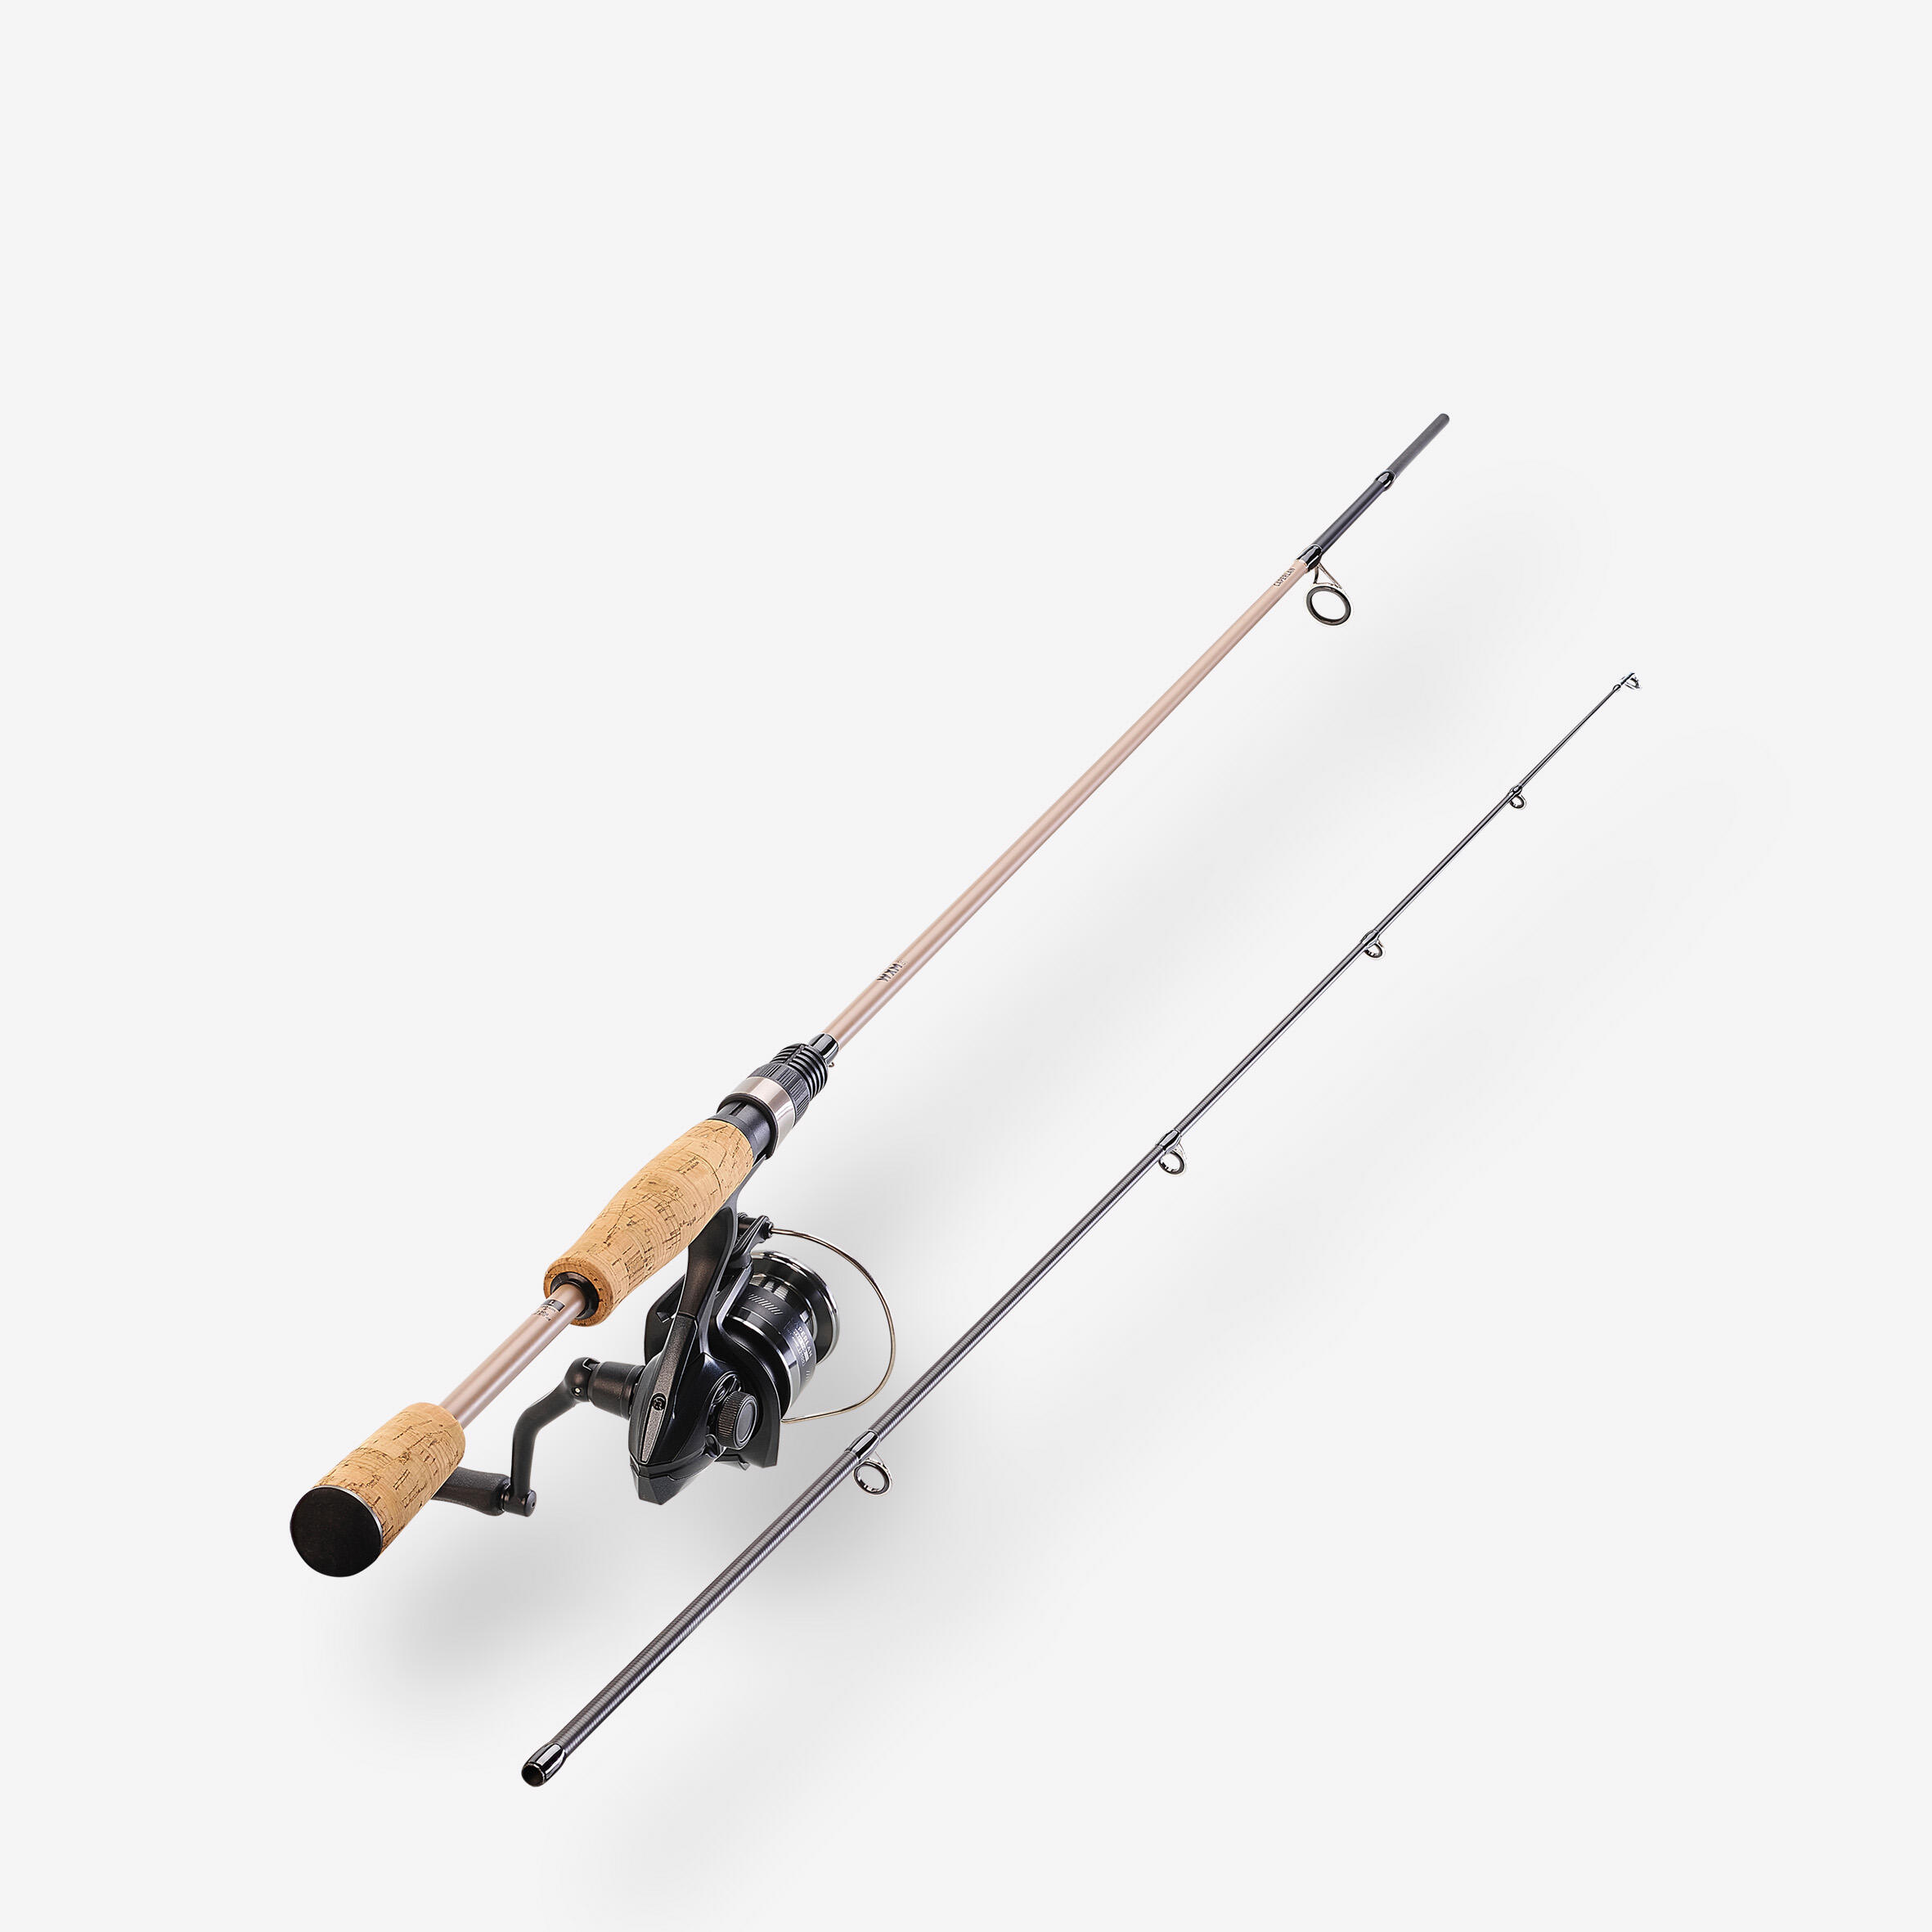 Portable Winter Ice Fishing Rod Tackle Gear Spinning Hard Rod Fish Reels Pole, Beige